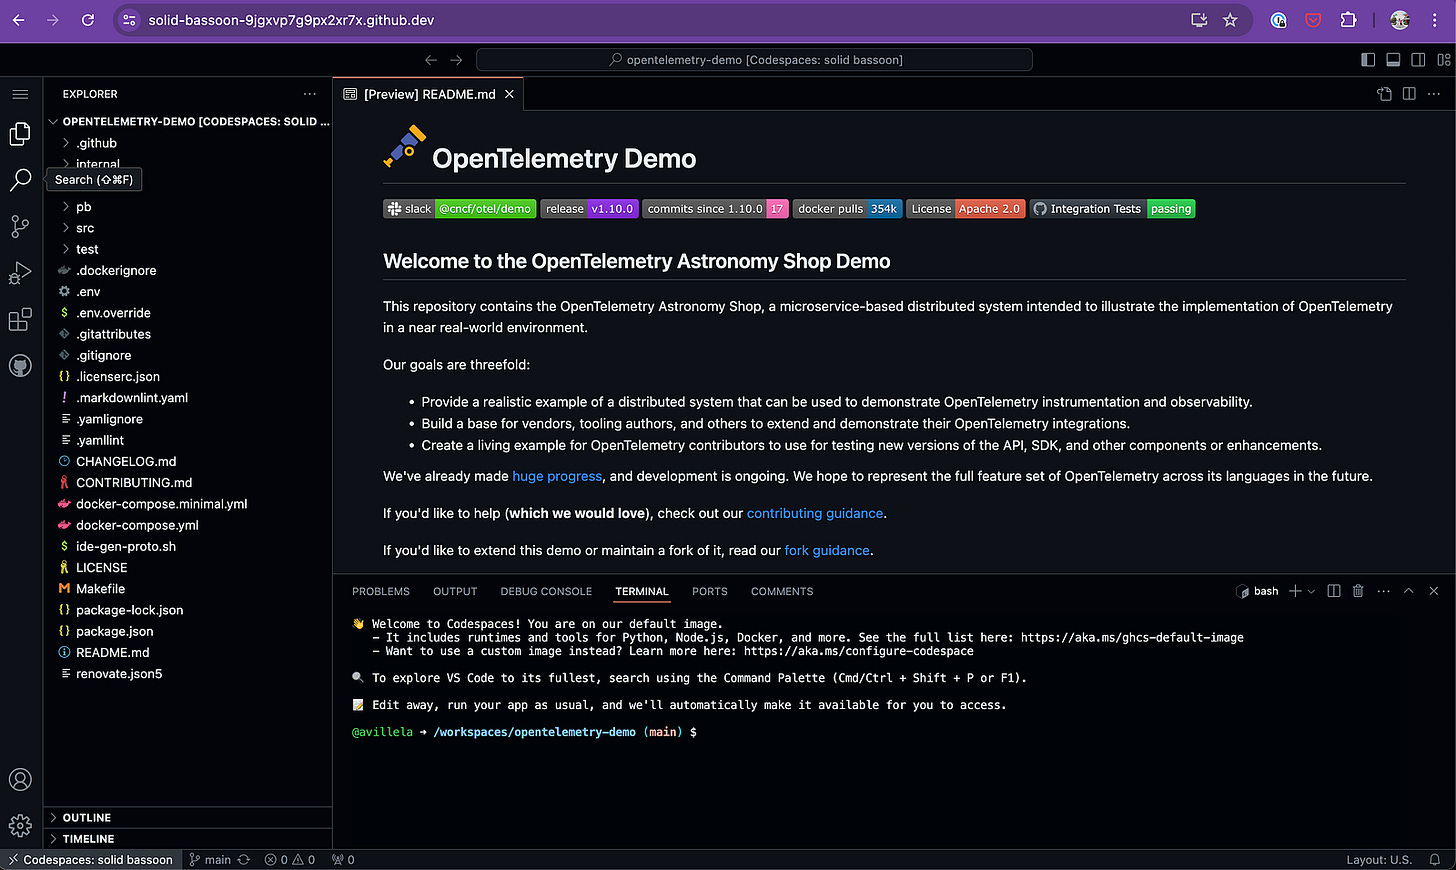 Screen capture depicting a browser-based VSCode development environment for the open-telemetry/opentelemetry-demo repository in GitHub